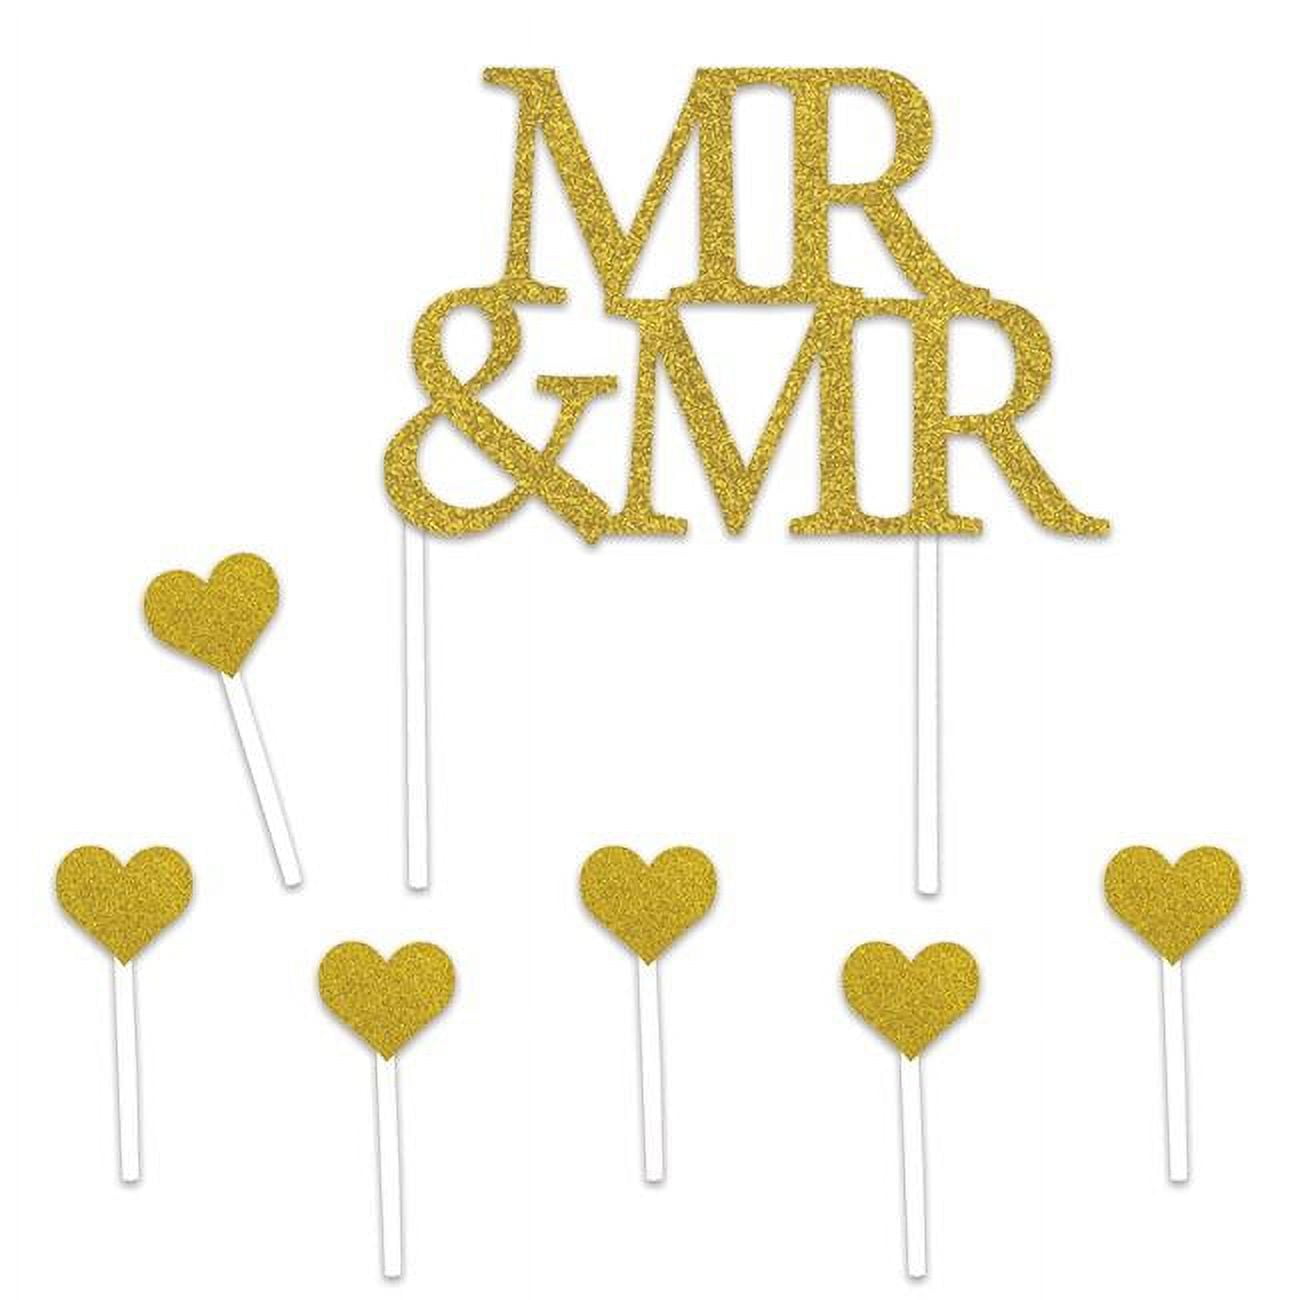 Beistle 53474 5.5 To 8.5 In. Mr & Mr Cake Topper - Pack Of 12